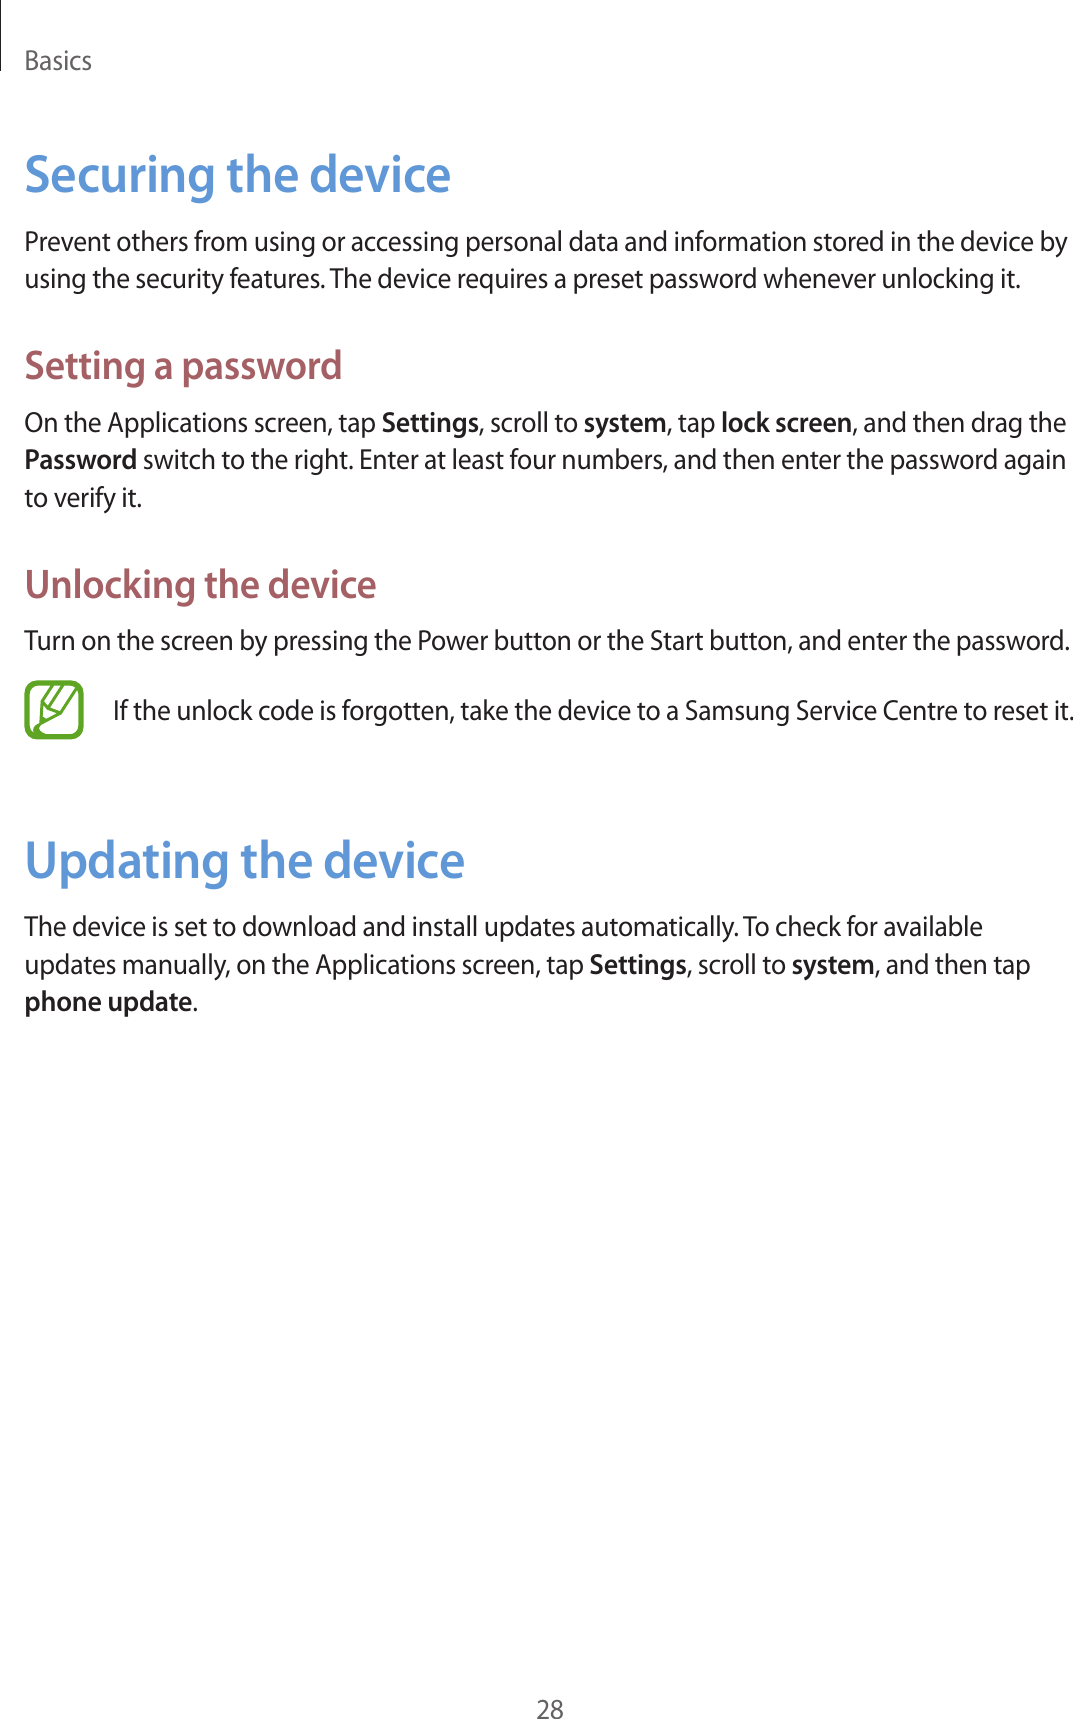 Basics28Securing the devicePrevent others from using or accessing personal data and information stored in the device by using the security features. The device requires a preset password whenever unlocking it.Setting a passwordOn the Applications screen, tap Settings, scroll to system, tap lock screen, and then drag the Password switch to the right. Enter at least four numbers, and then enter the password again to verify it.Unlocking the deviceTurn on the screen by pressing the Power button or the Start button, and enter the password.If the unlock code is forgotten, take the device to a Samsung Service Centre to reset it.Updating the deviceThe device is set to download and install updates automatically. To check for available updates manually, on the Applications screen, tap Settings, scroll to system, and then tap phone update.